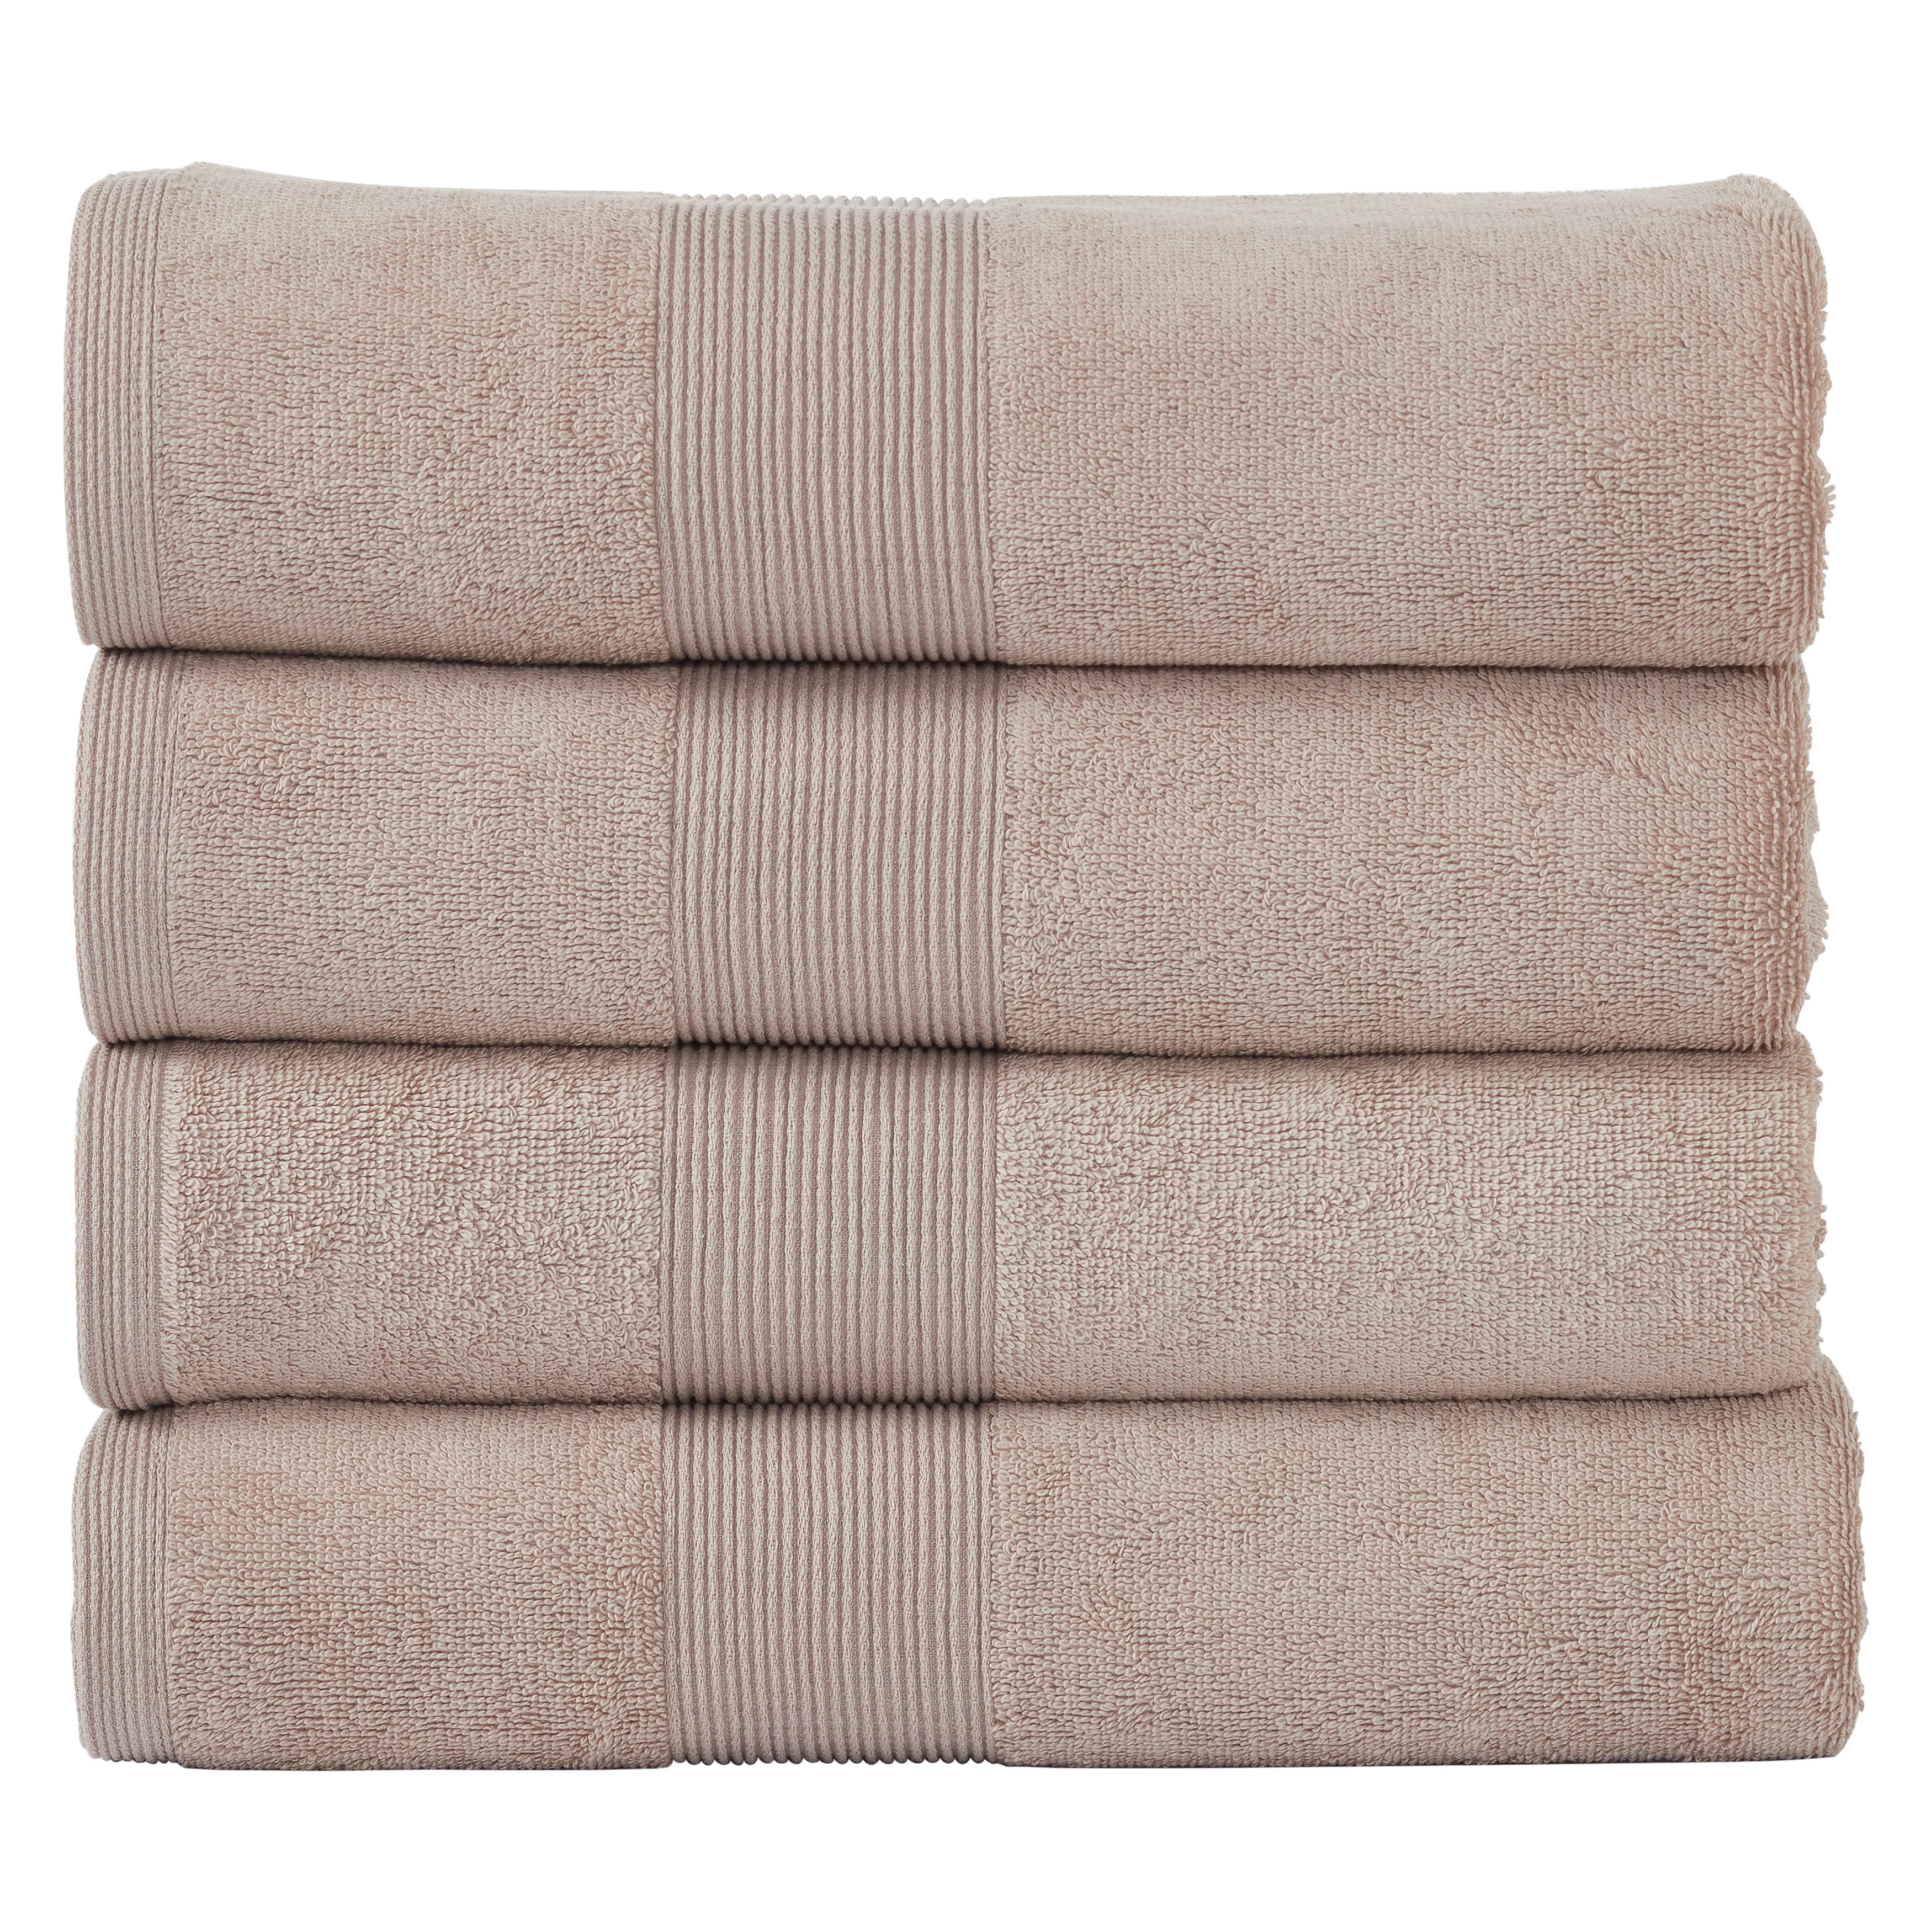 https://ak1.ostkcdn.com/images/products/is/images/direct/468a00b07eefcf8533bcb874762025d7dc184371/Fabstyles-Super-Soft-and-Absorbent-Bath-Towel%2C-27-x-54-Inches%2C-Set-of-4.jpg